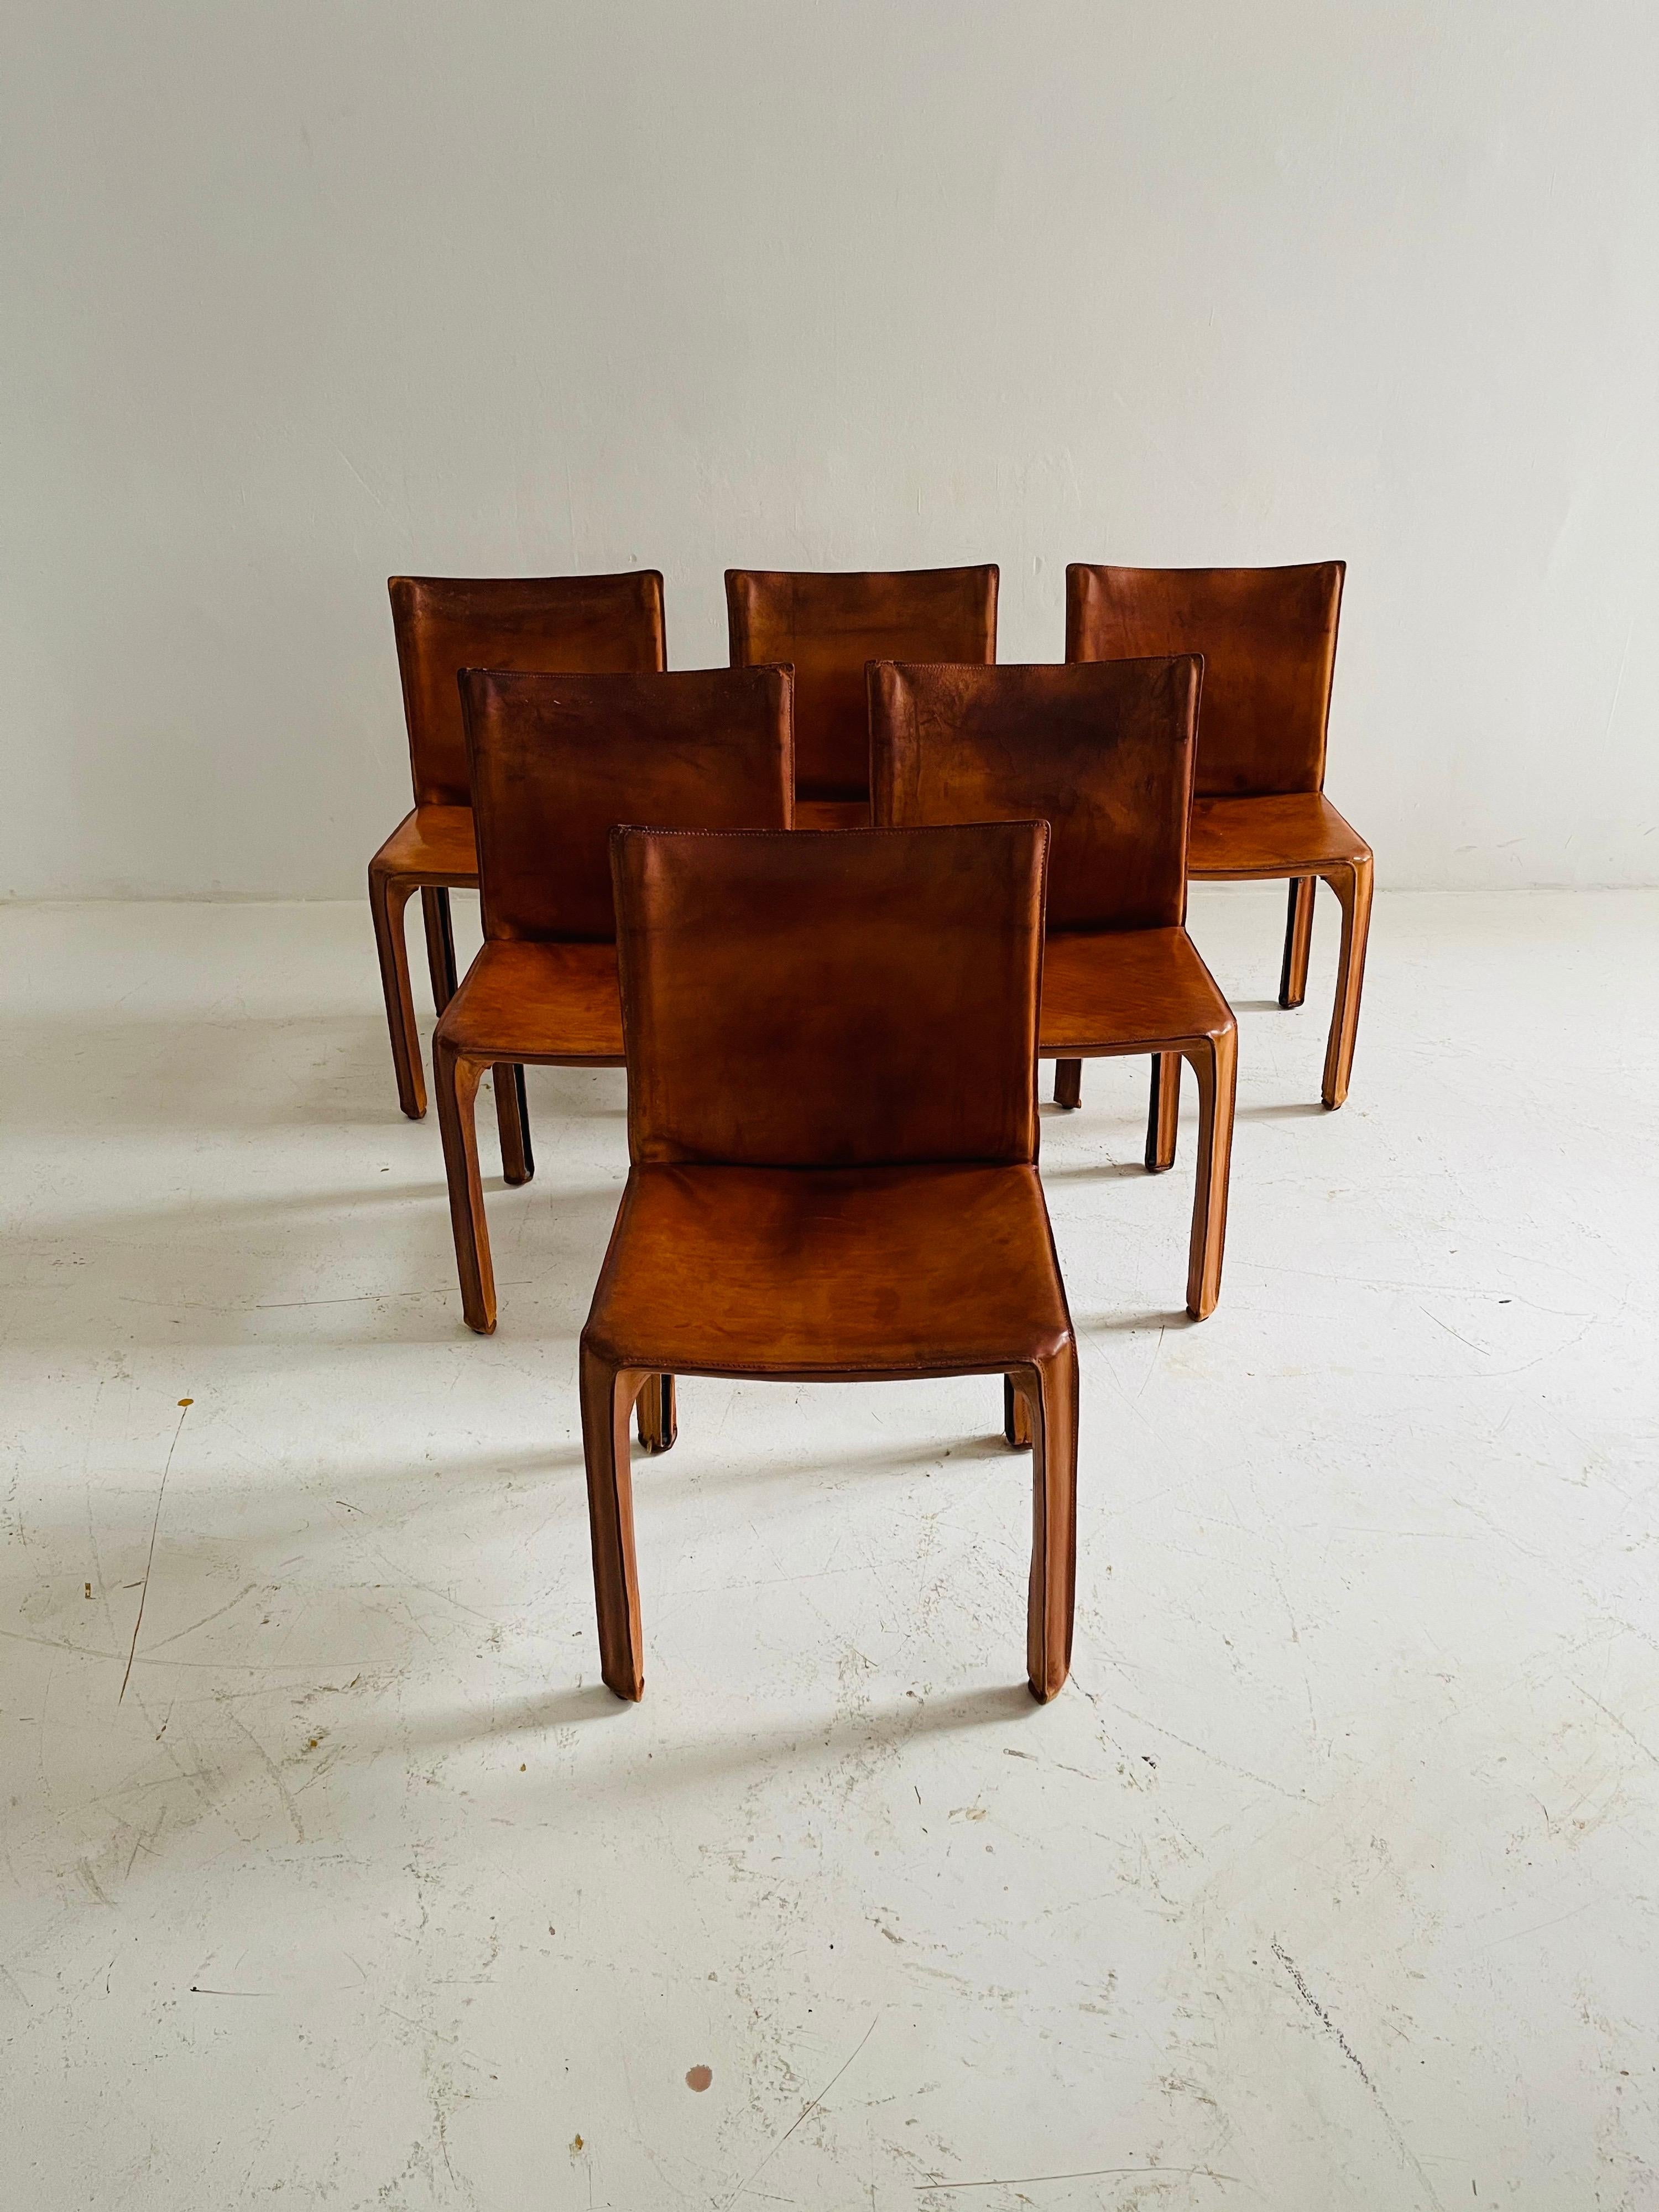 Mario Bellini CAB chairs set of six by Cassina, patinated cognac leather, 1970s.